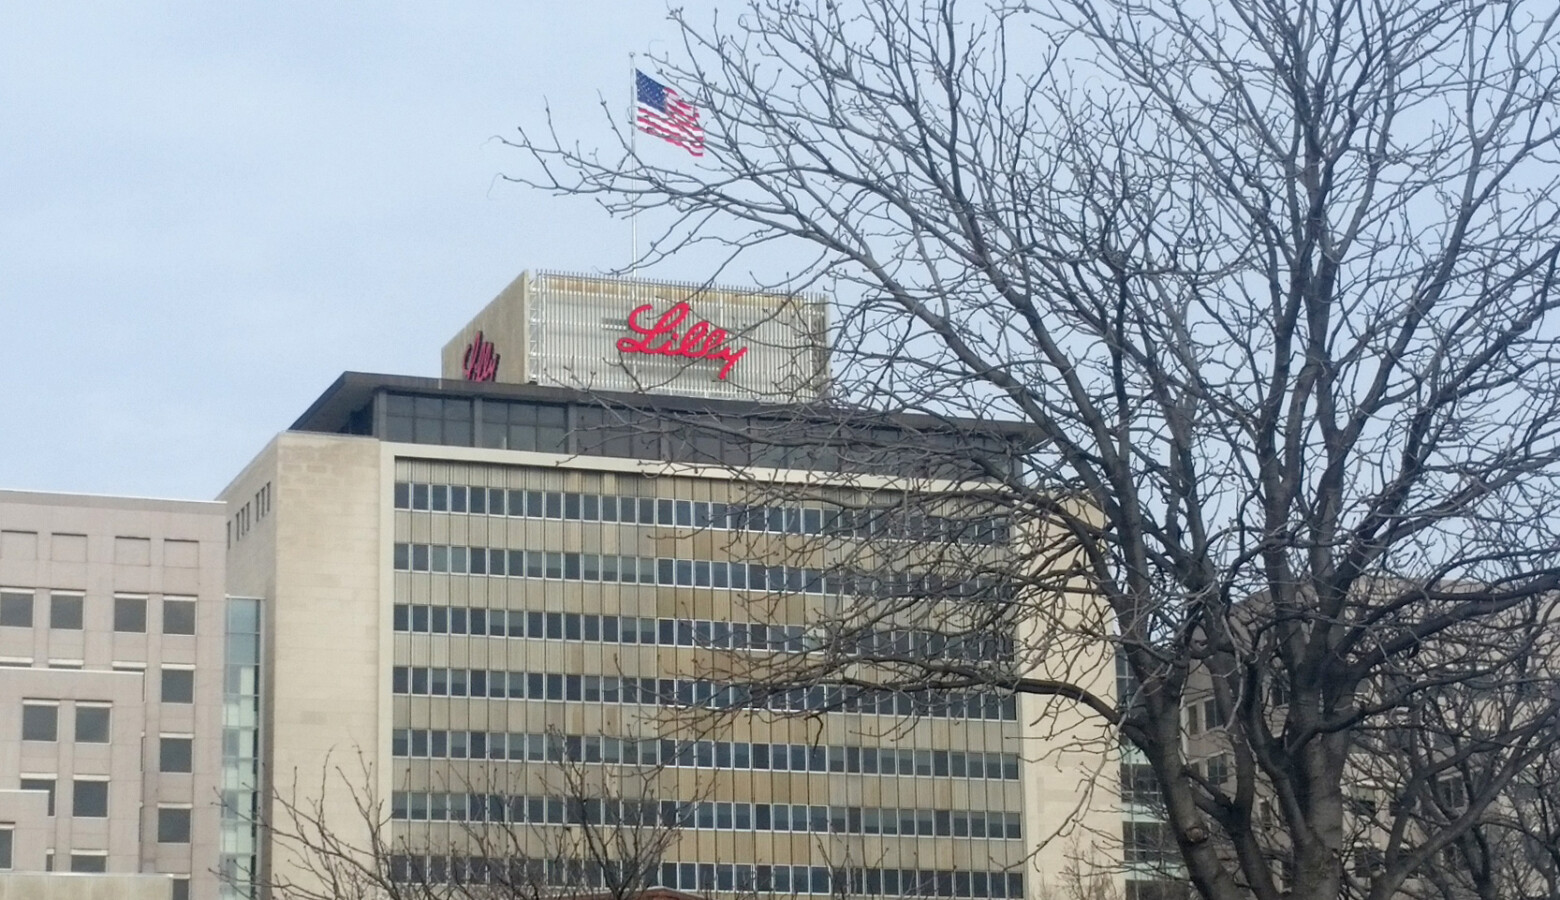 Eli Lilly's Corporate Headquarters in Indianapolis. The company announced it will be starting Phase 3 of the COVID-19 antibody treatment study that will be conducted in nursing homes. (Lauren Chapman/IPB News)